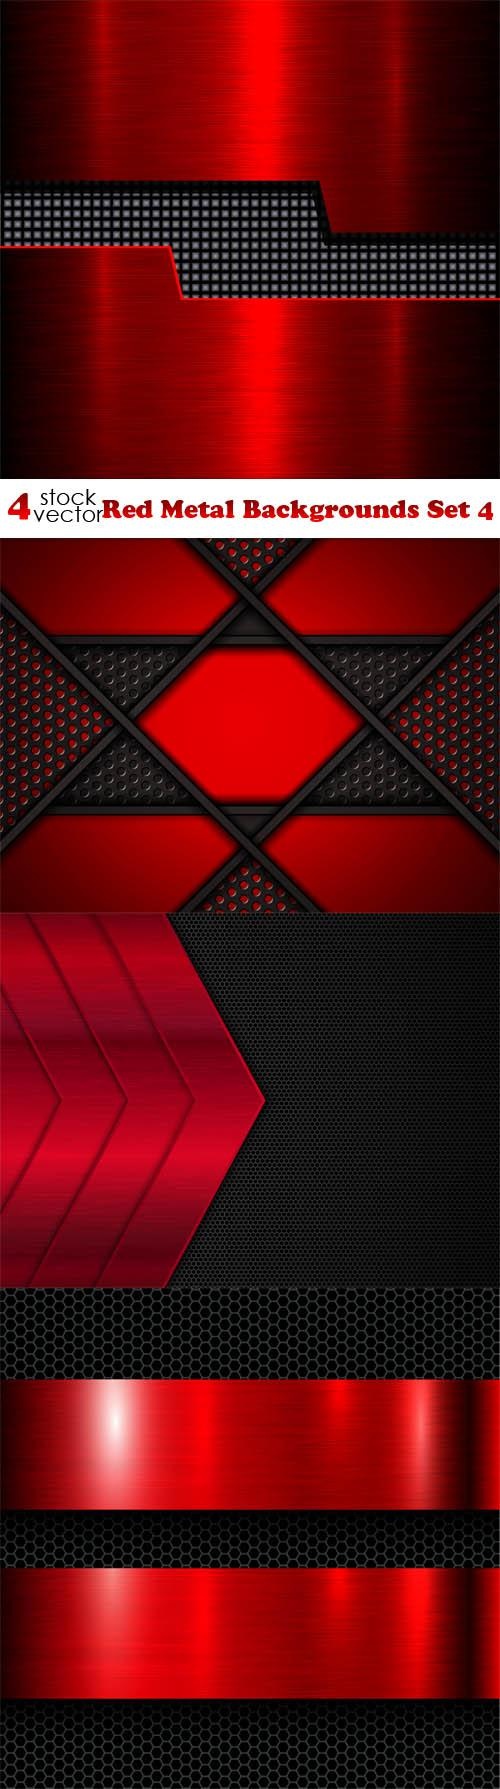 Red Metal Backgrounds Set 4 ((aitff (9 files)